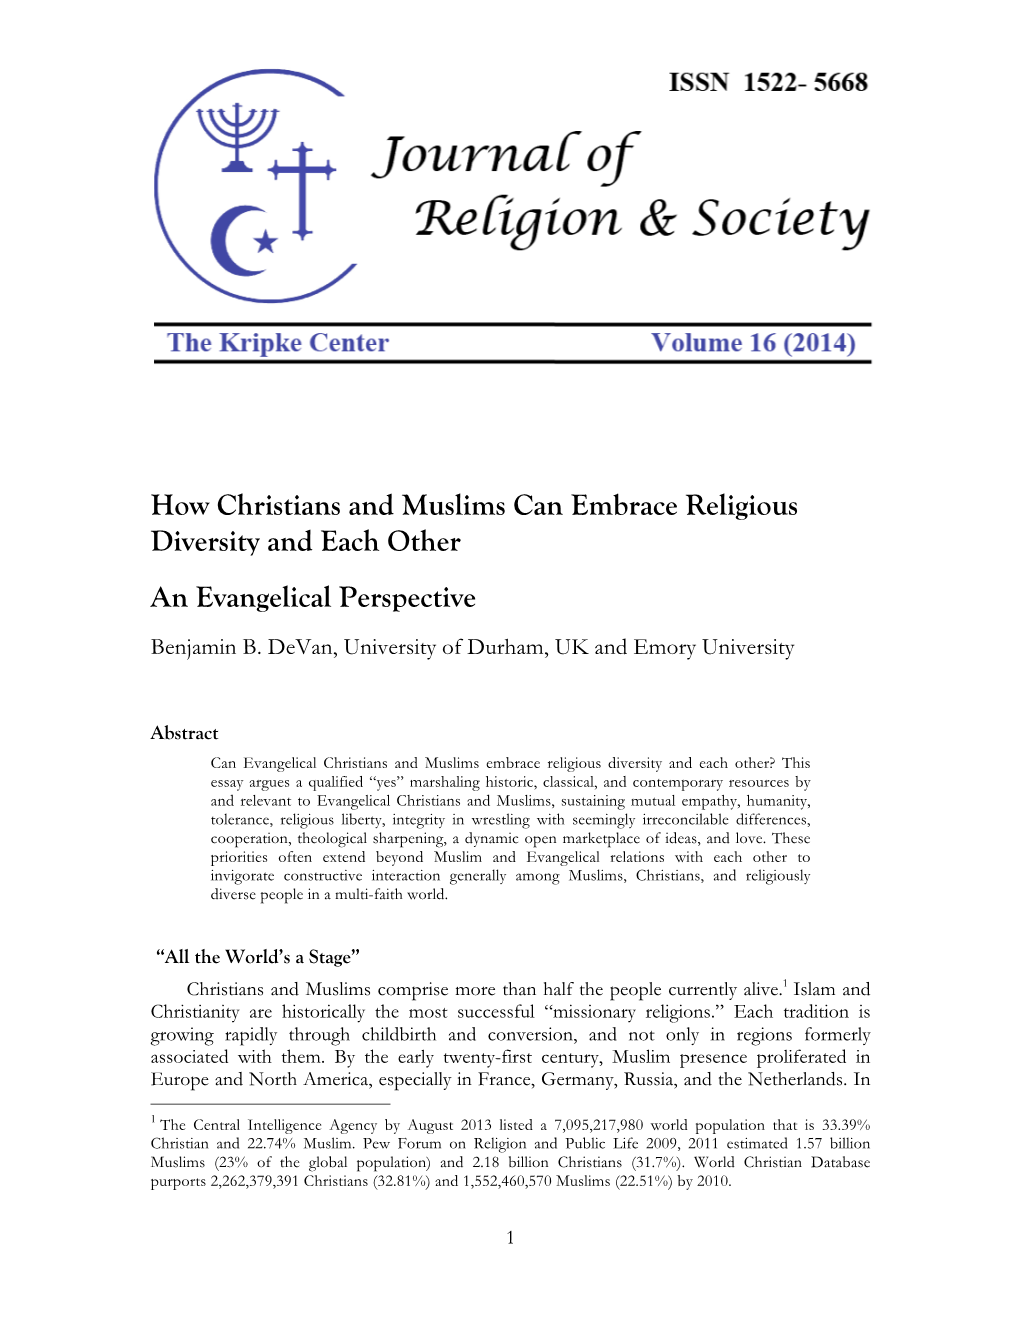 How Christians and Muslims Can Embrace Religious Diversity and Each Other an Evangelical Perspective Benjamin B